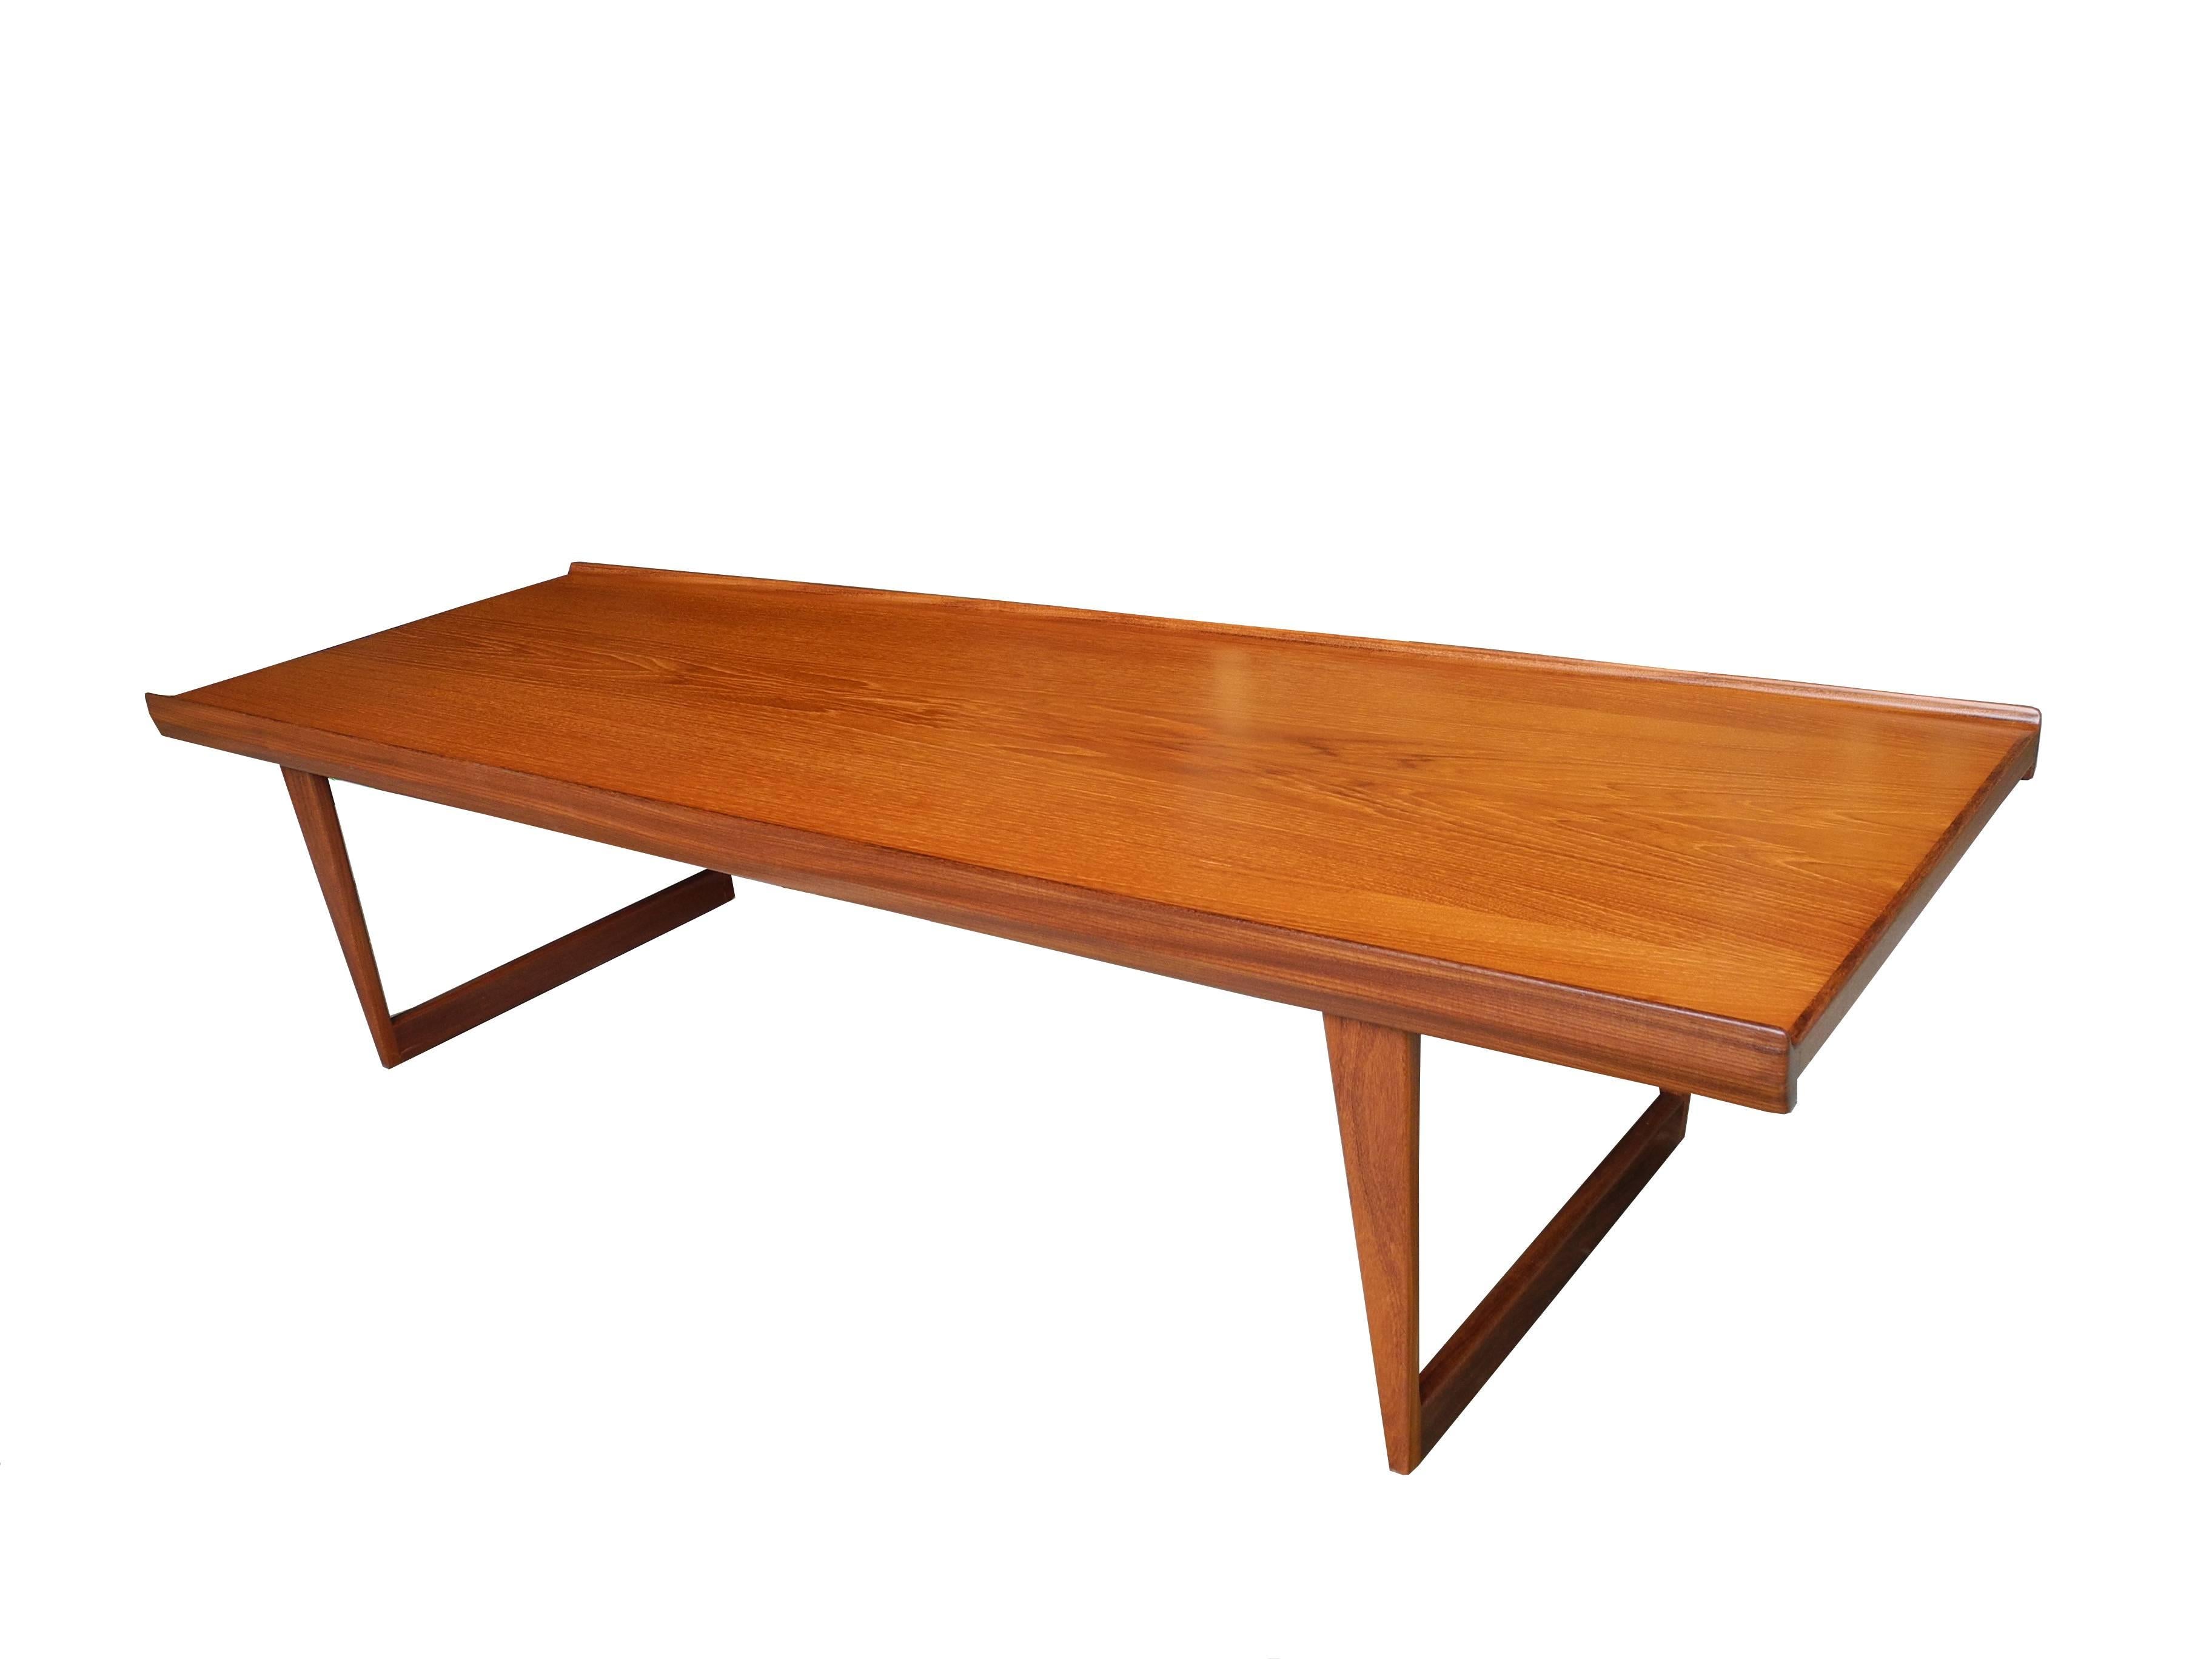 This beautifully crafted Danish Modern teak coffee table has tapered framed legs and a lip on each long edge. Designed by Løvig Nielsen in the 1960s.